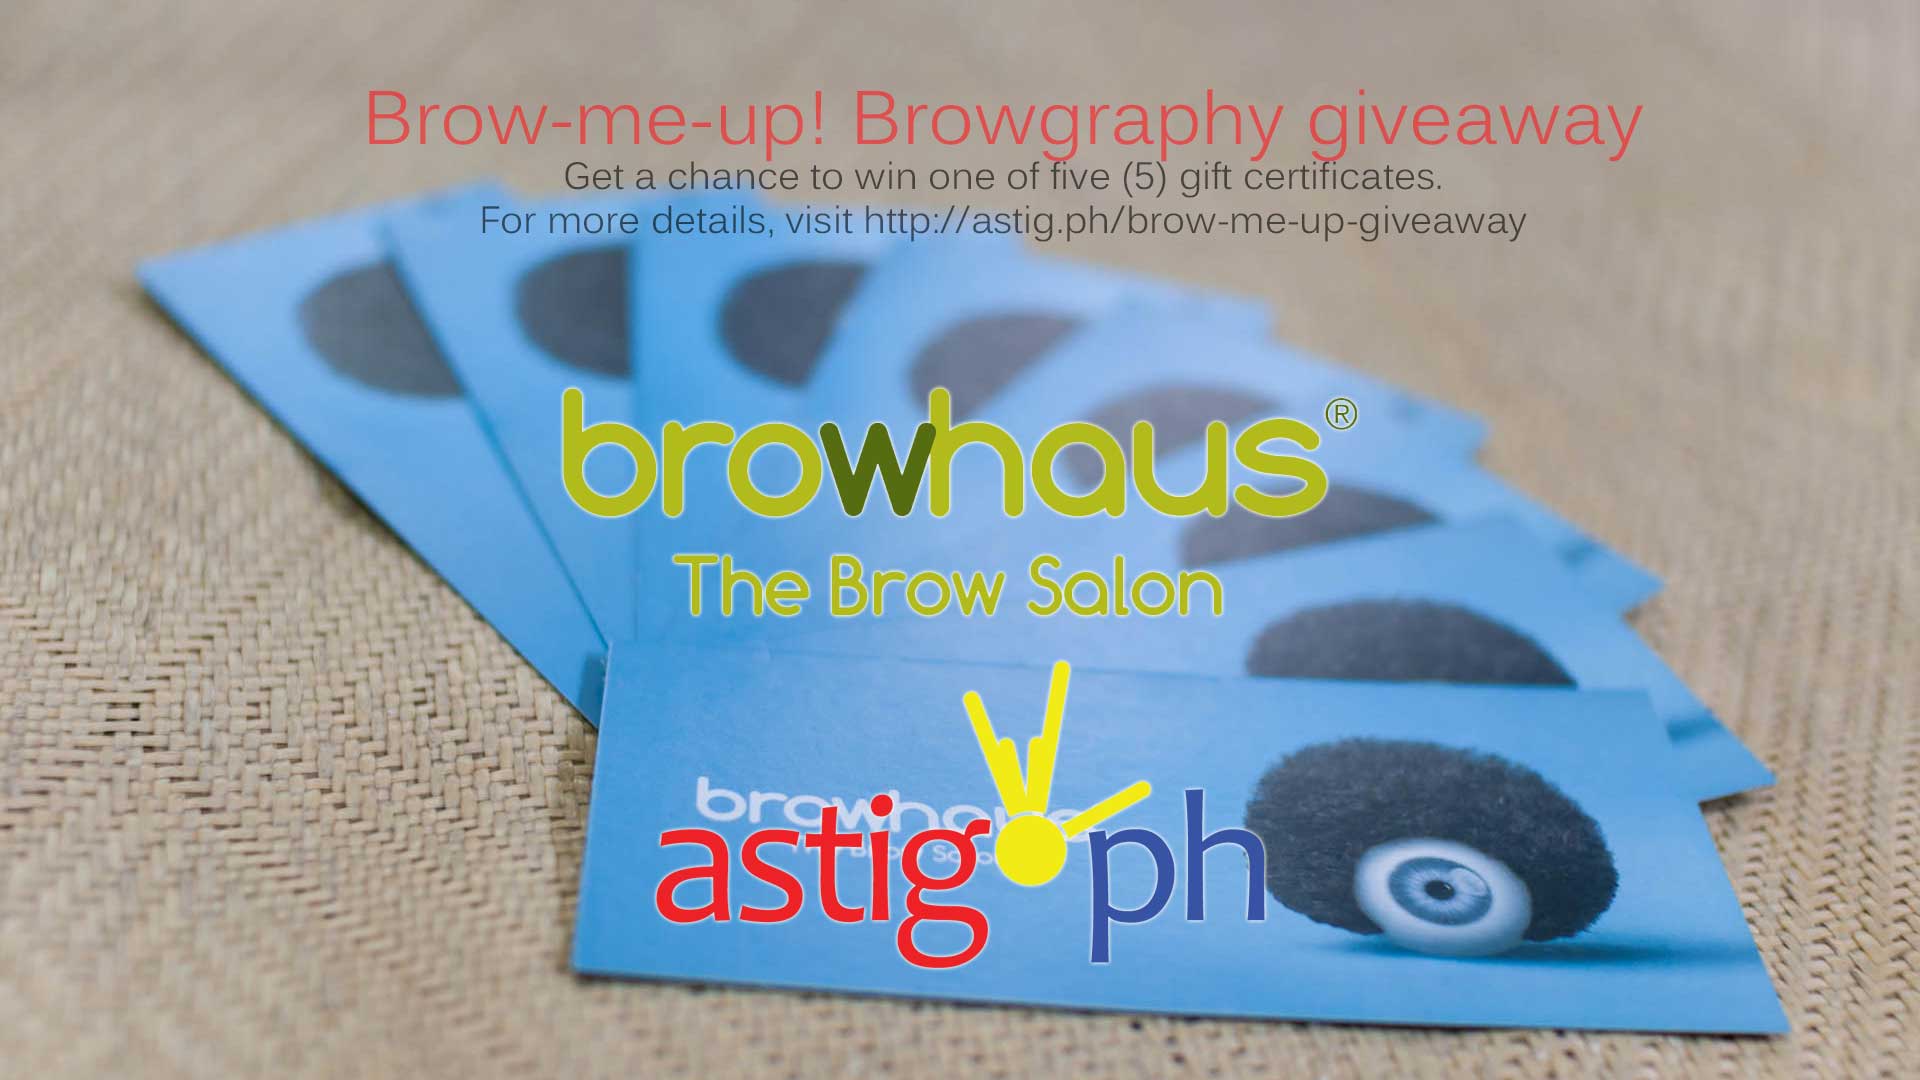 Brow-me-up Browhaus browgraphy giveaway